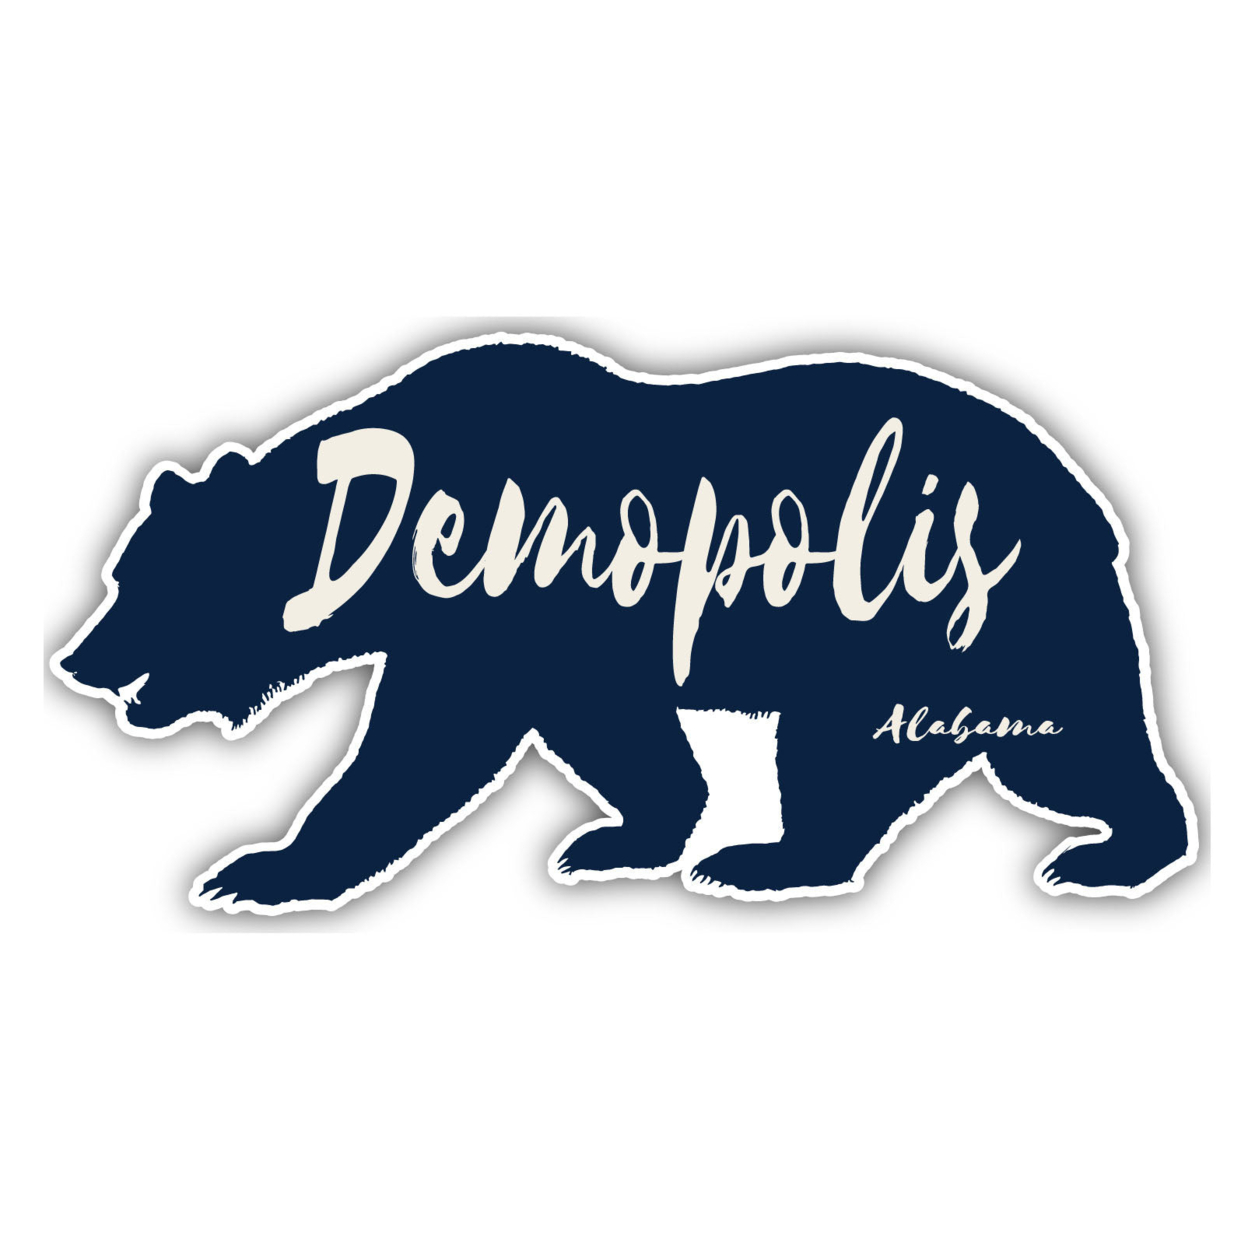 Demopolis Alabama Souvenir Decorative Stickers (Choose Theme And Size) - 4-Pack, 12-Inch, Great Outdoors